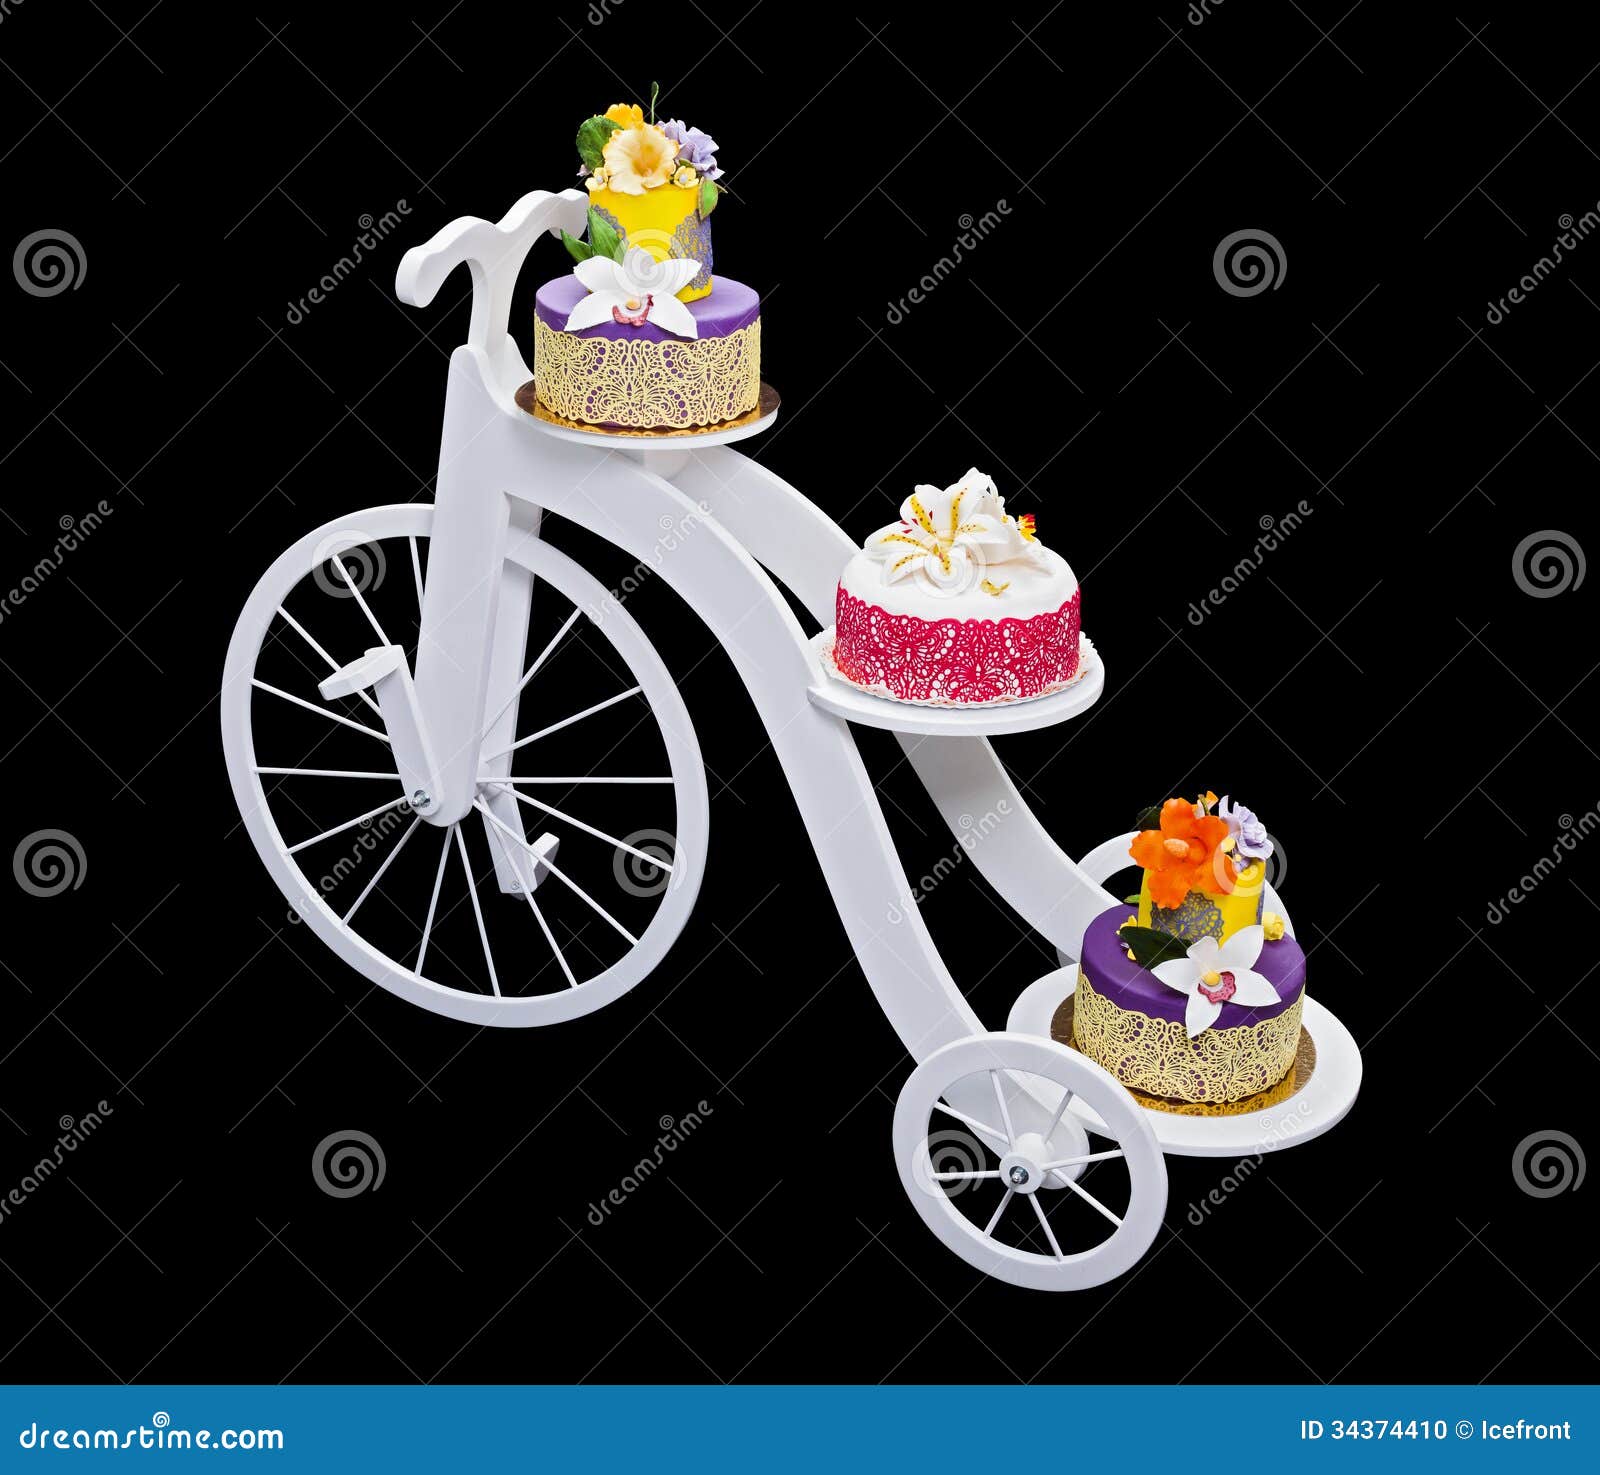 Unique Bicycle Cake Stand With Three Cakes Stock Photo ...